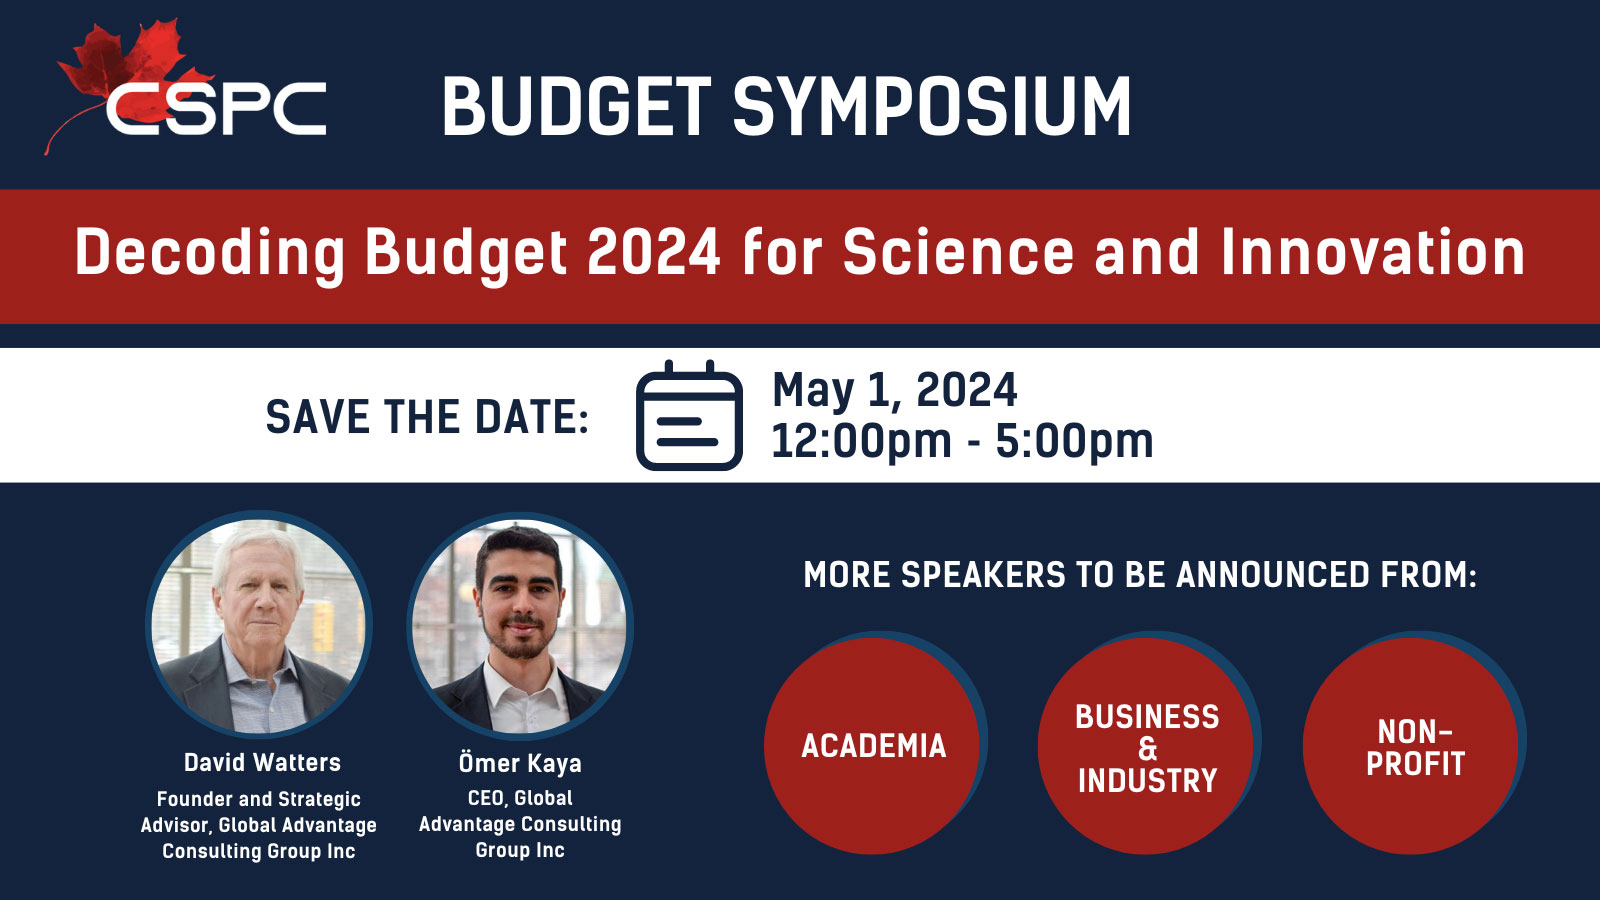 Budget Symposium Save The Date-May 1, 2024